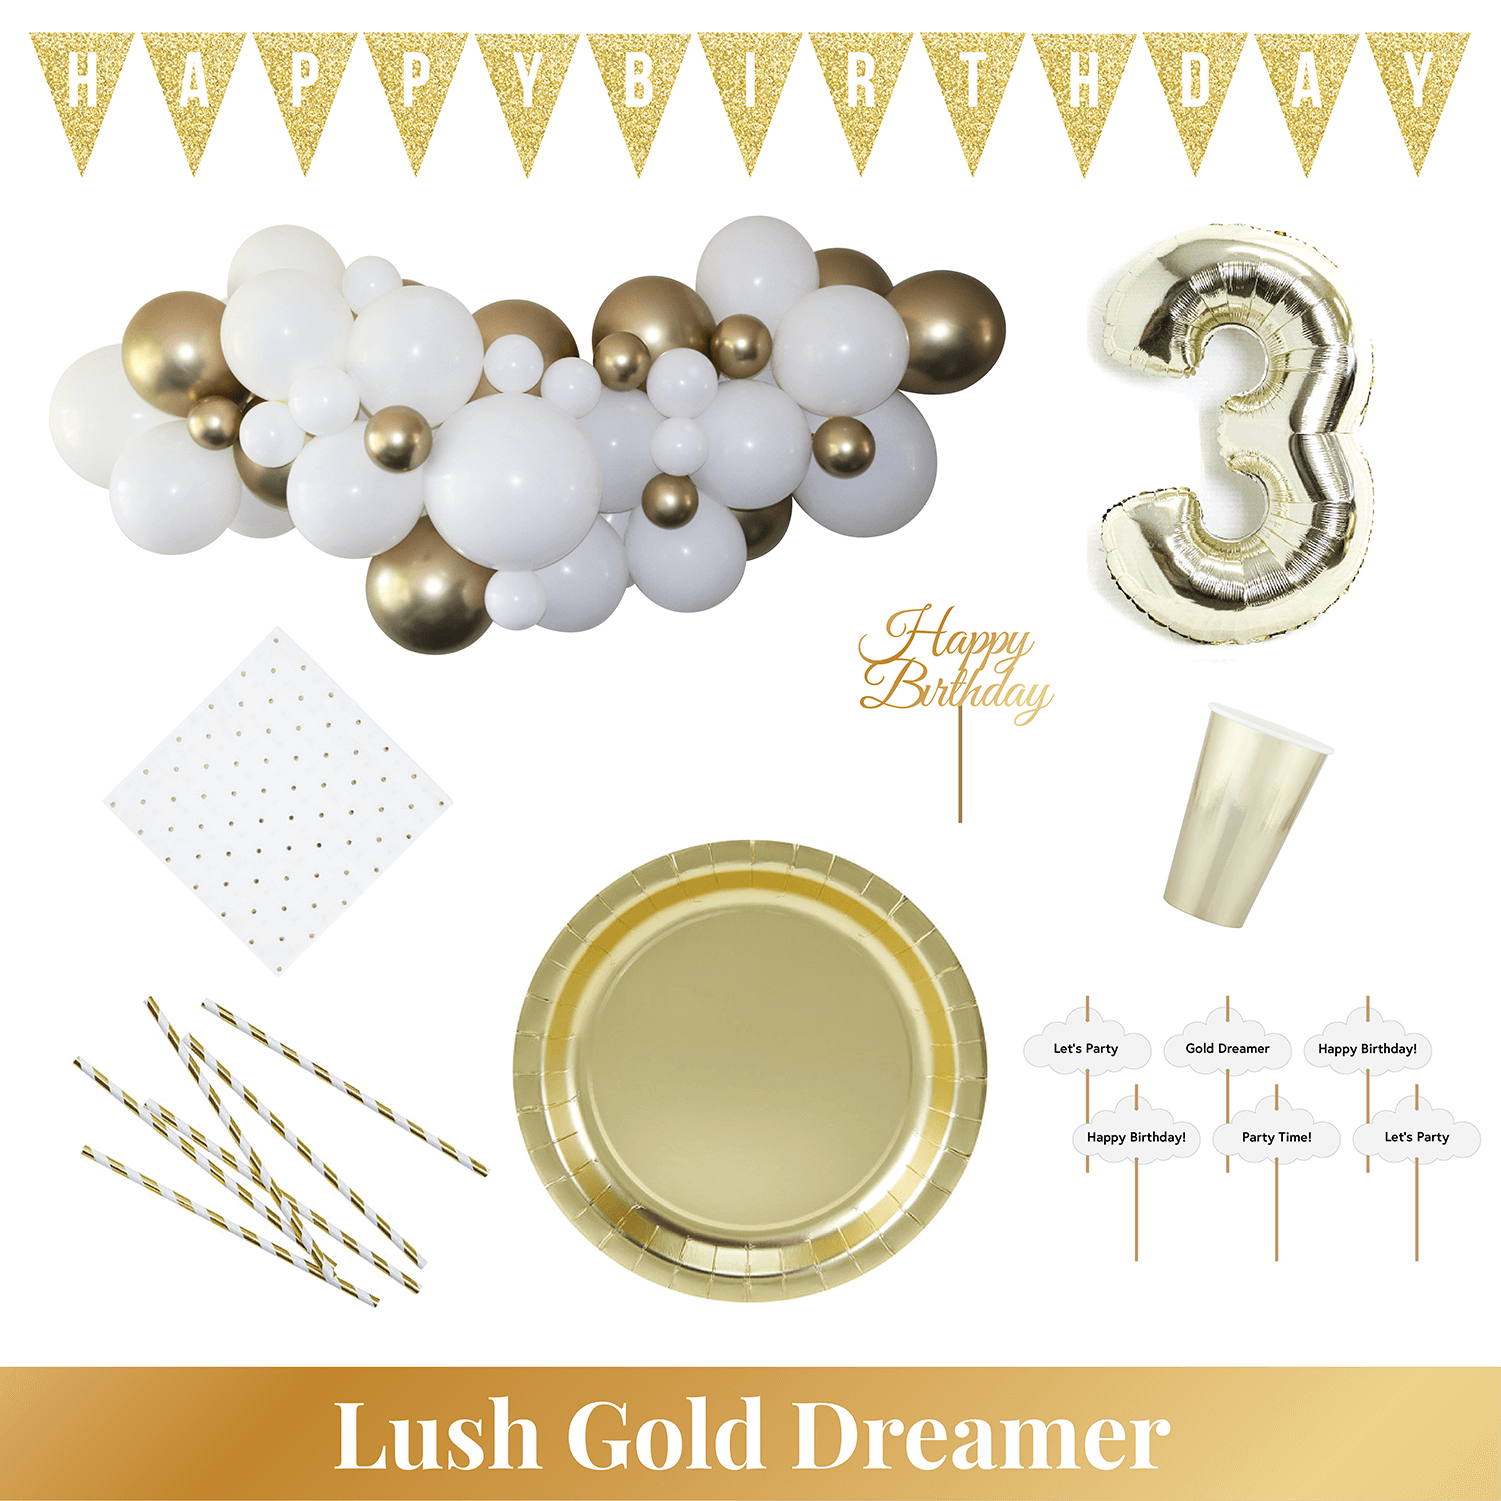 Lush Gold Dreamer party kit contents